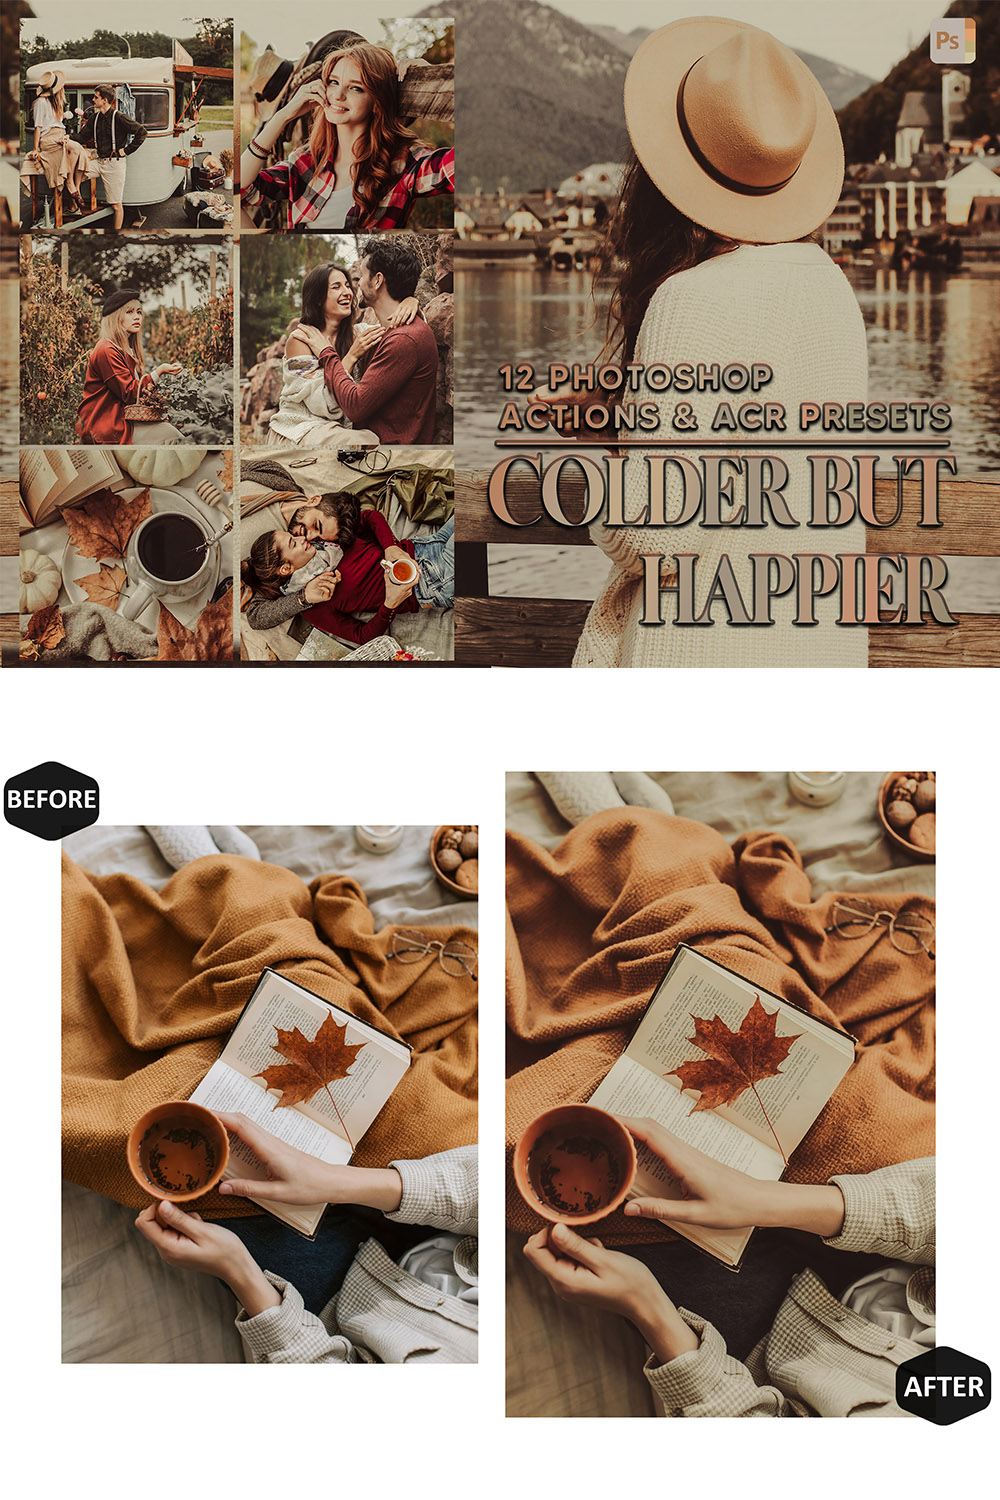 12 Photoshop Actions, Colder But Happier Ps Action, Autumn Bright ACR Preset, Warm Fall Ps Filter, Atn Portrait And Lifestyle Theme For Instagram, Blogger pinterest preview image.